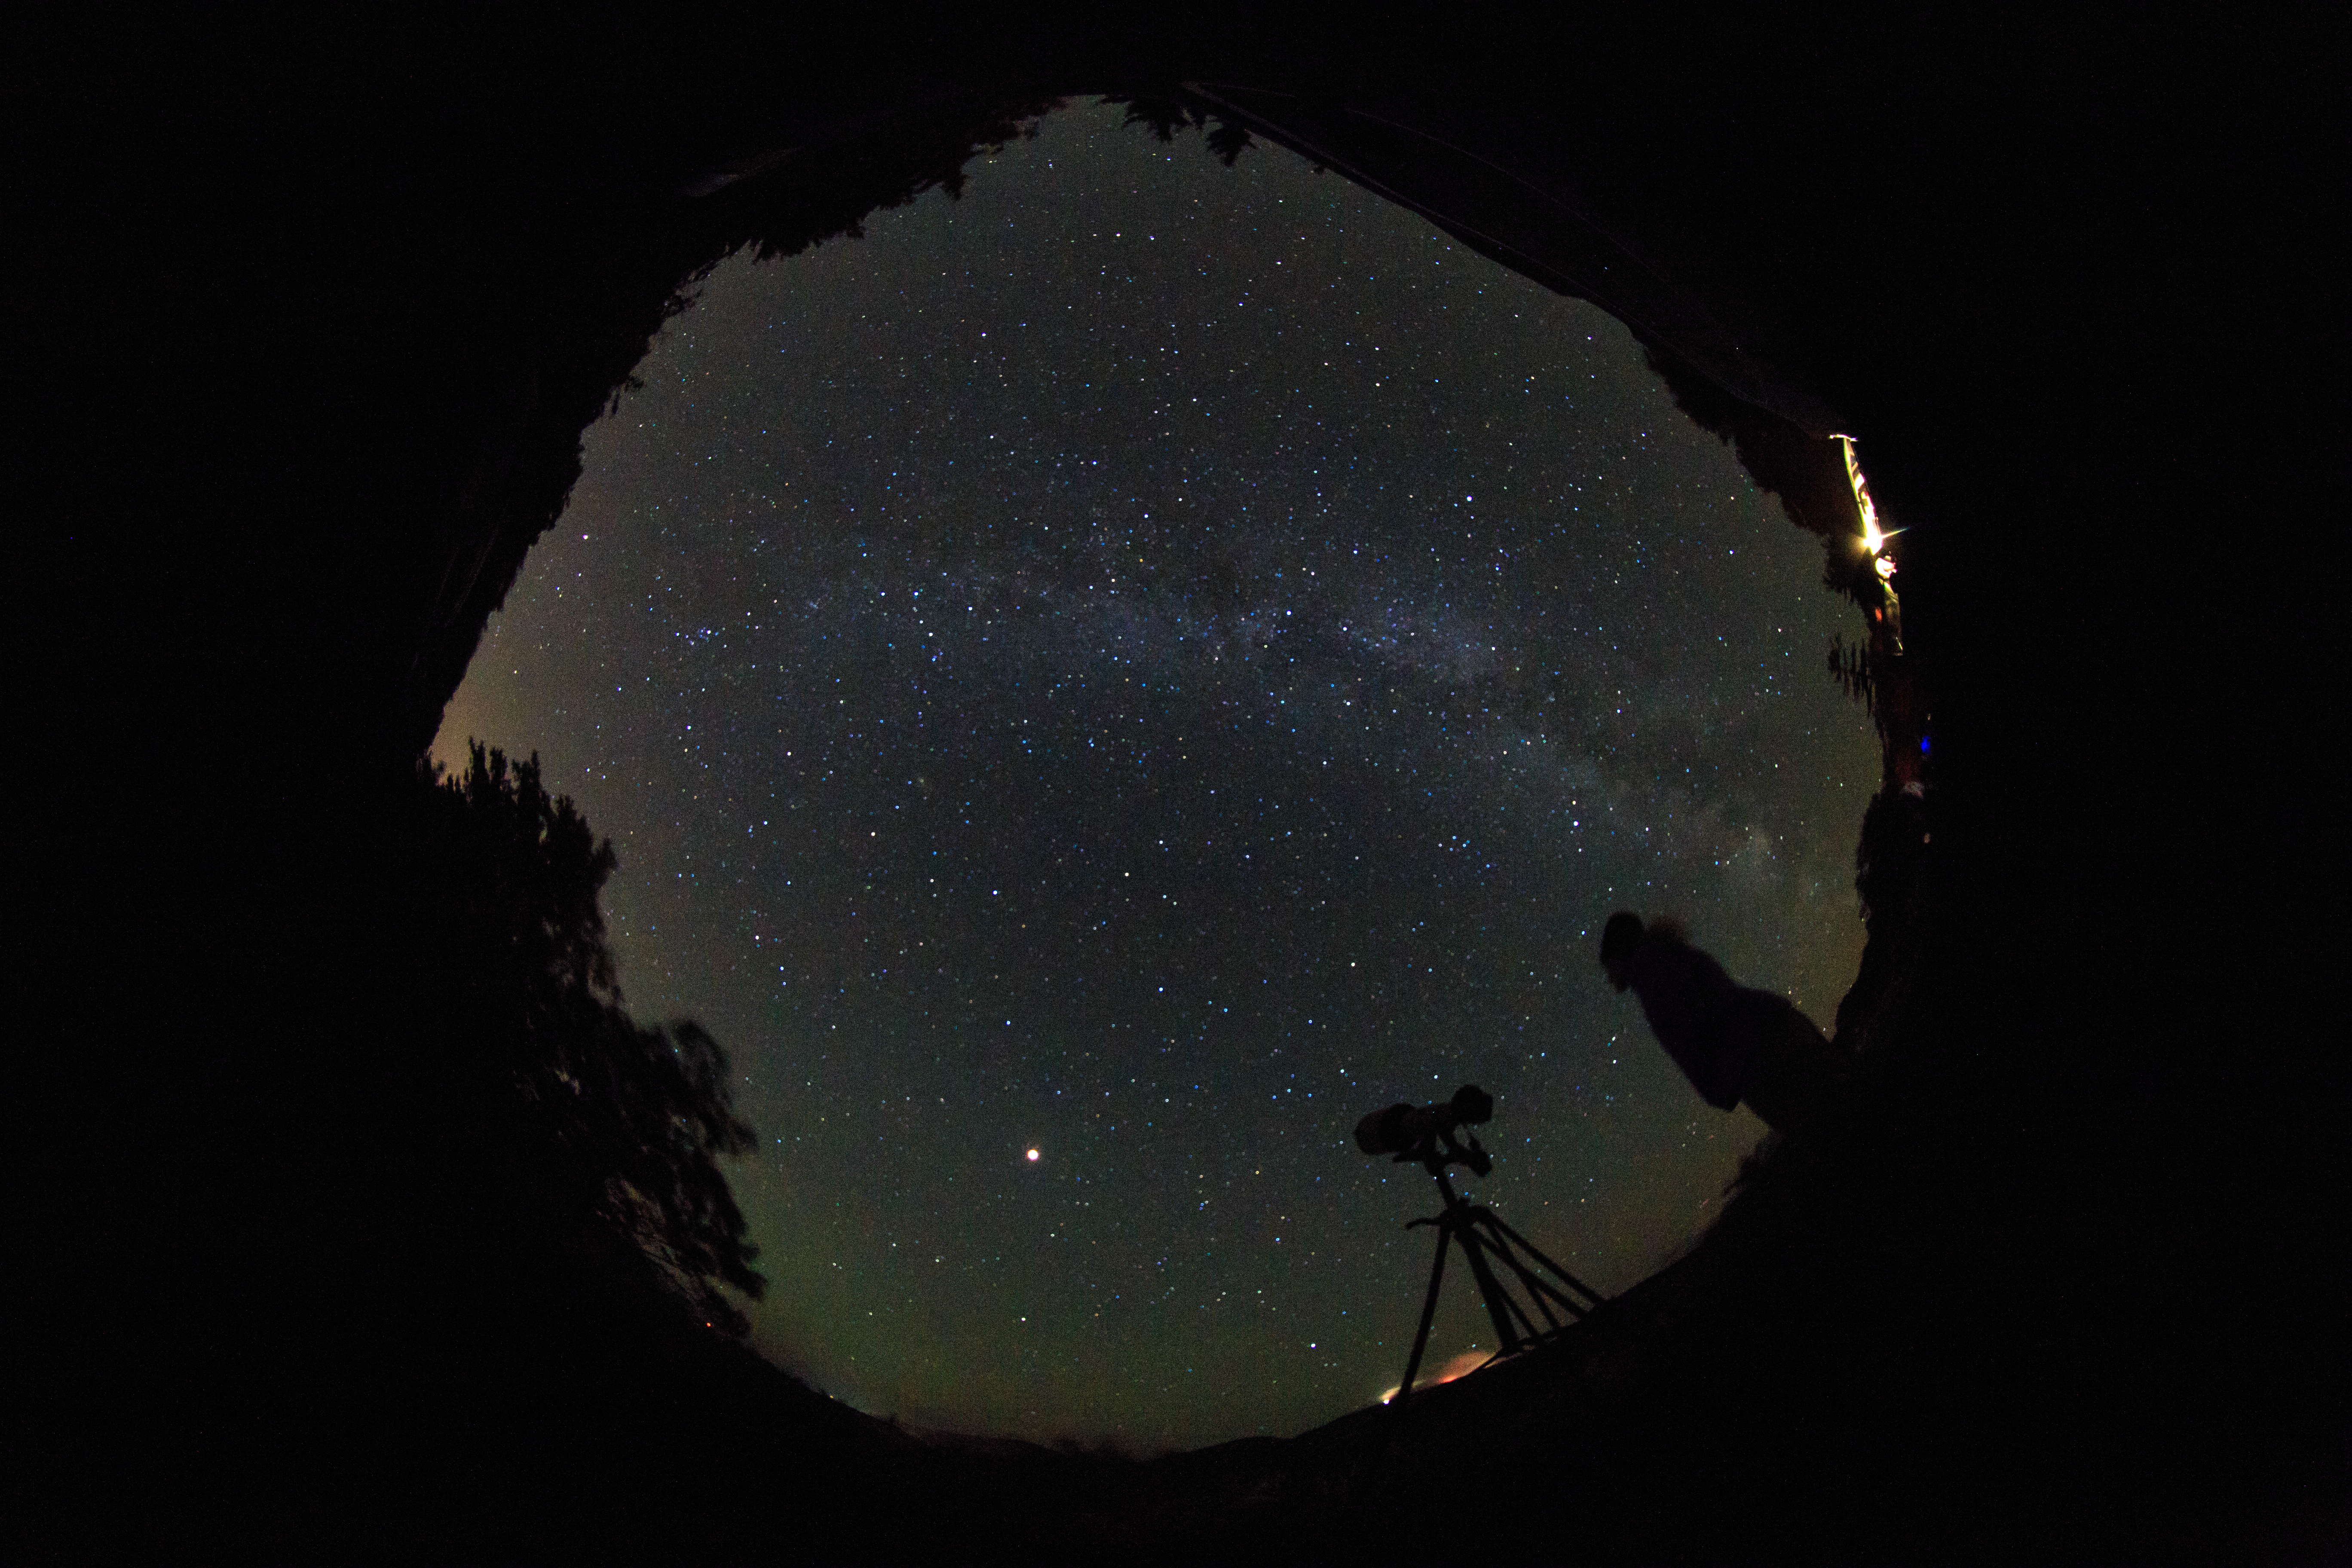 Milky Way with person standing by a long lens on a tripod as seen through a fish-eye lens.